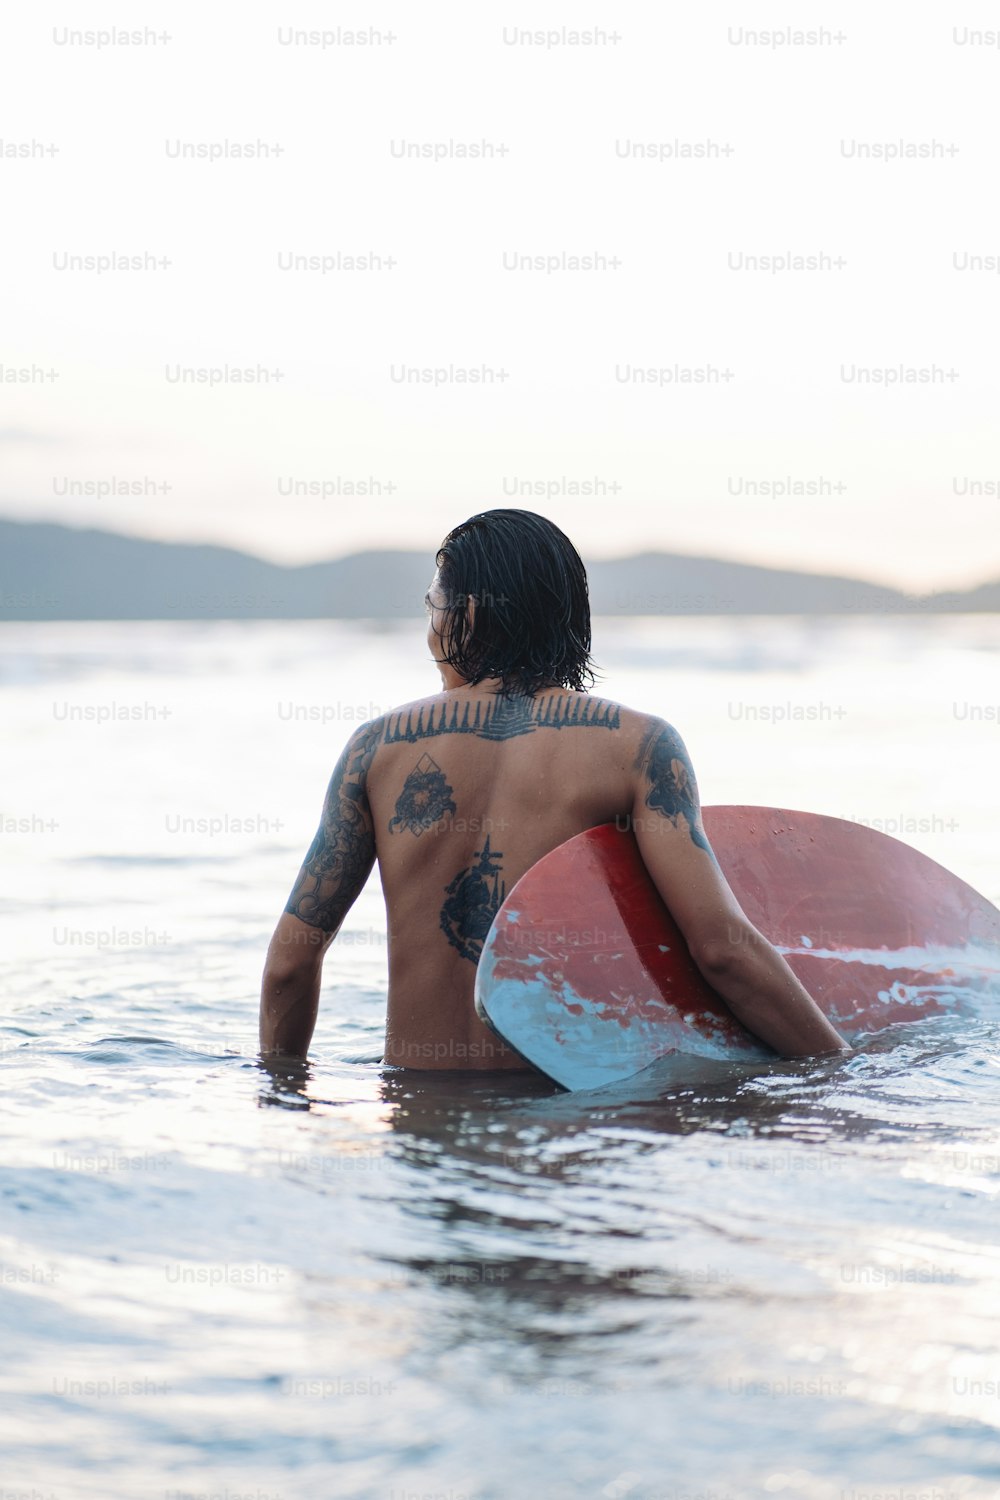 a man holding a surfboard in the water